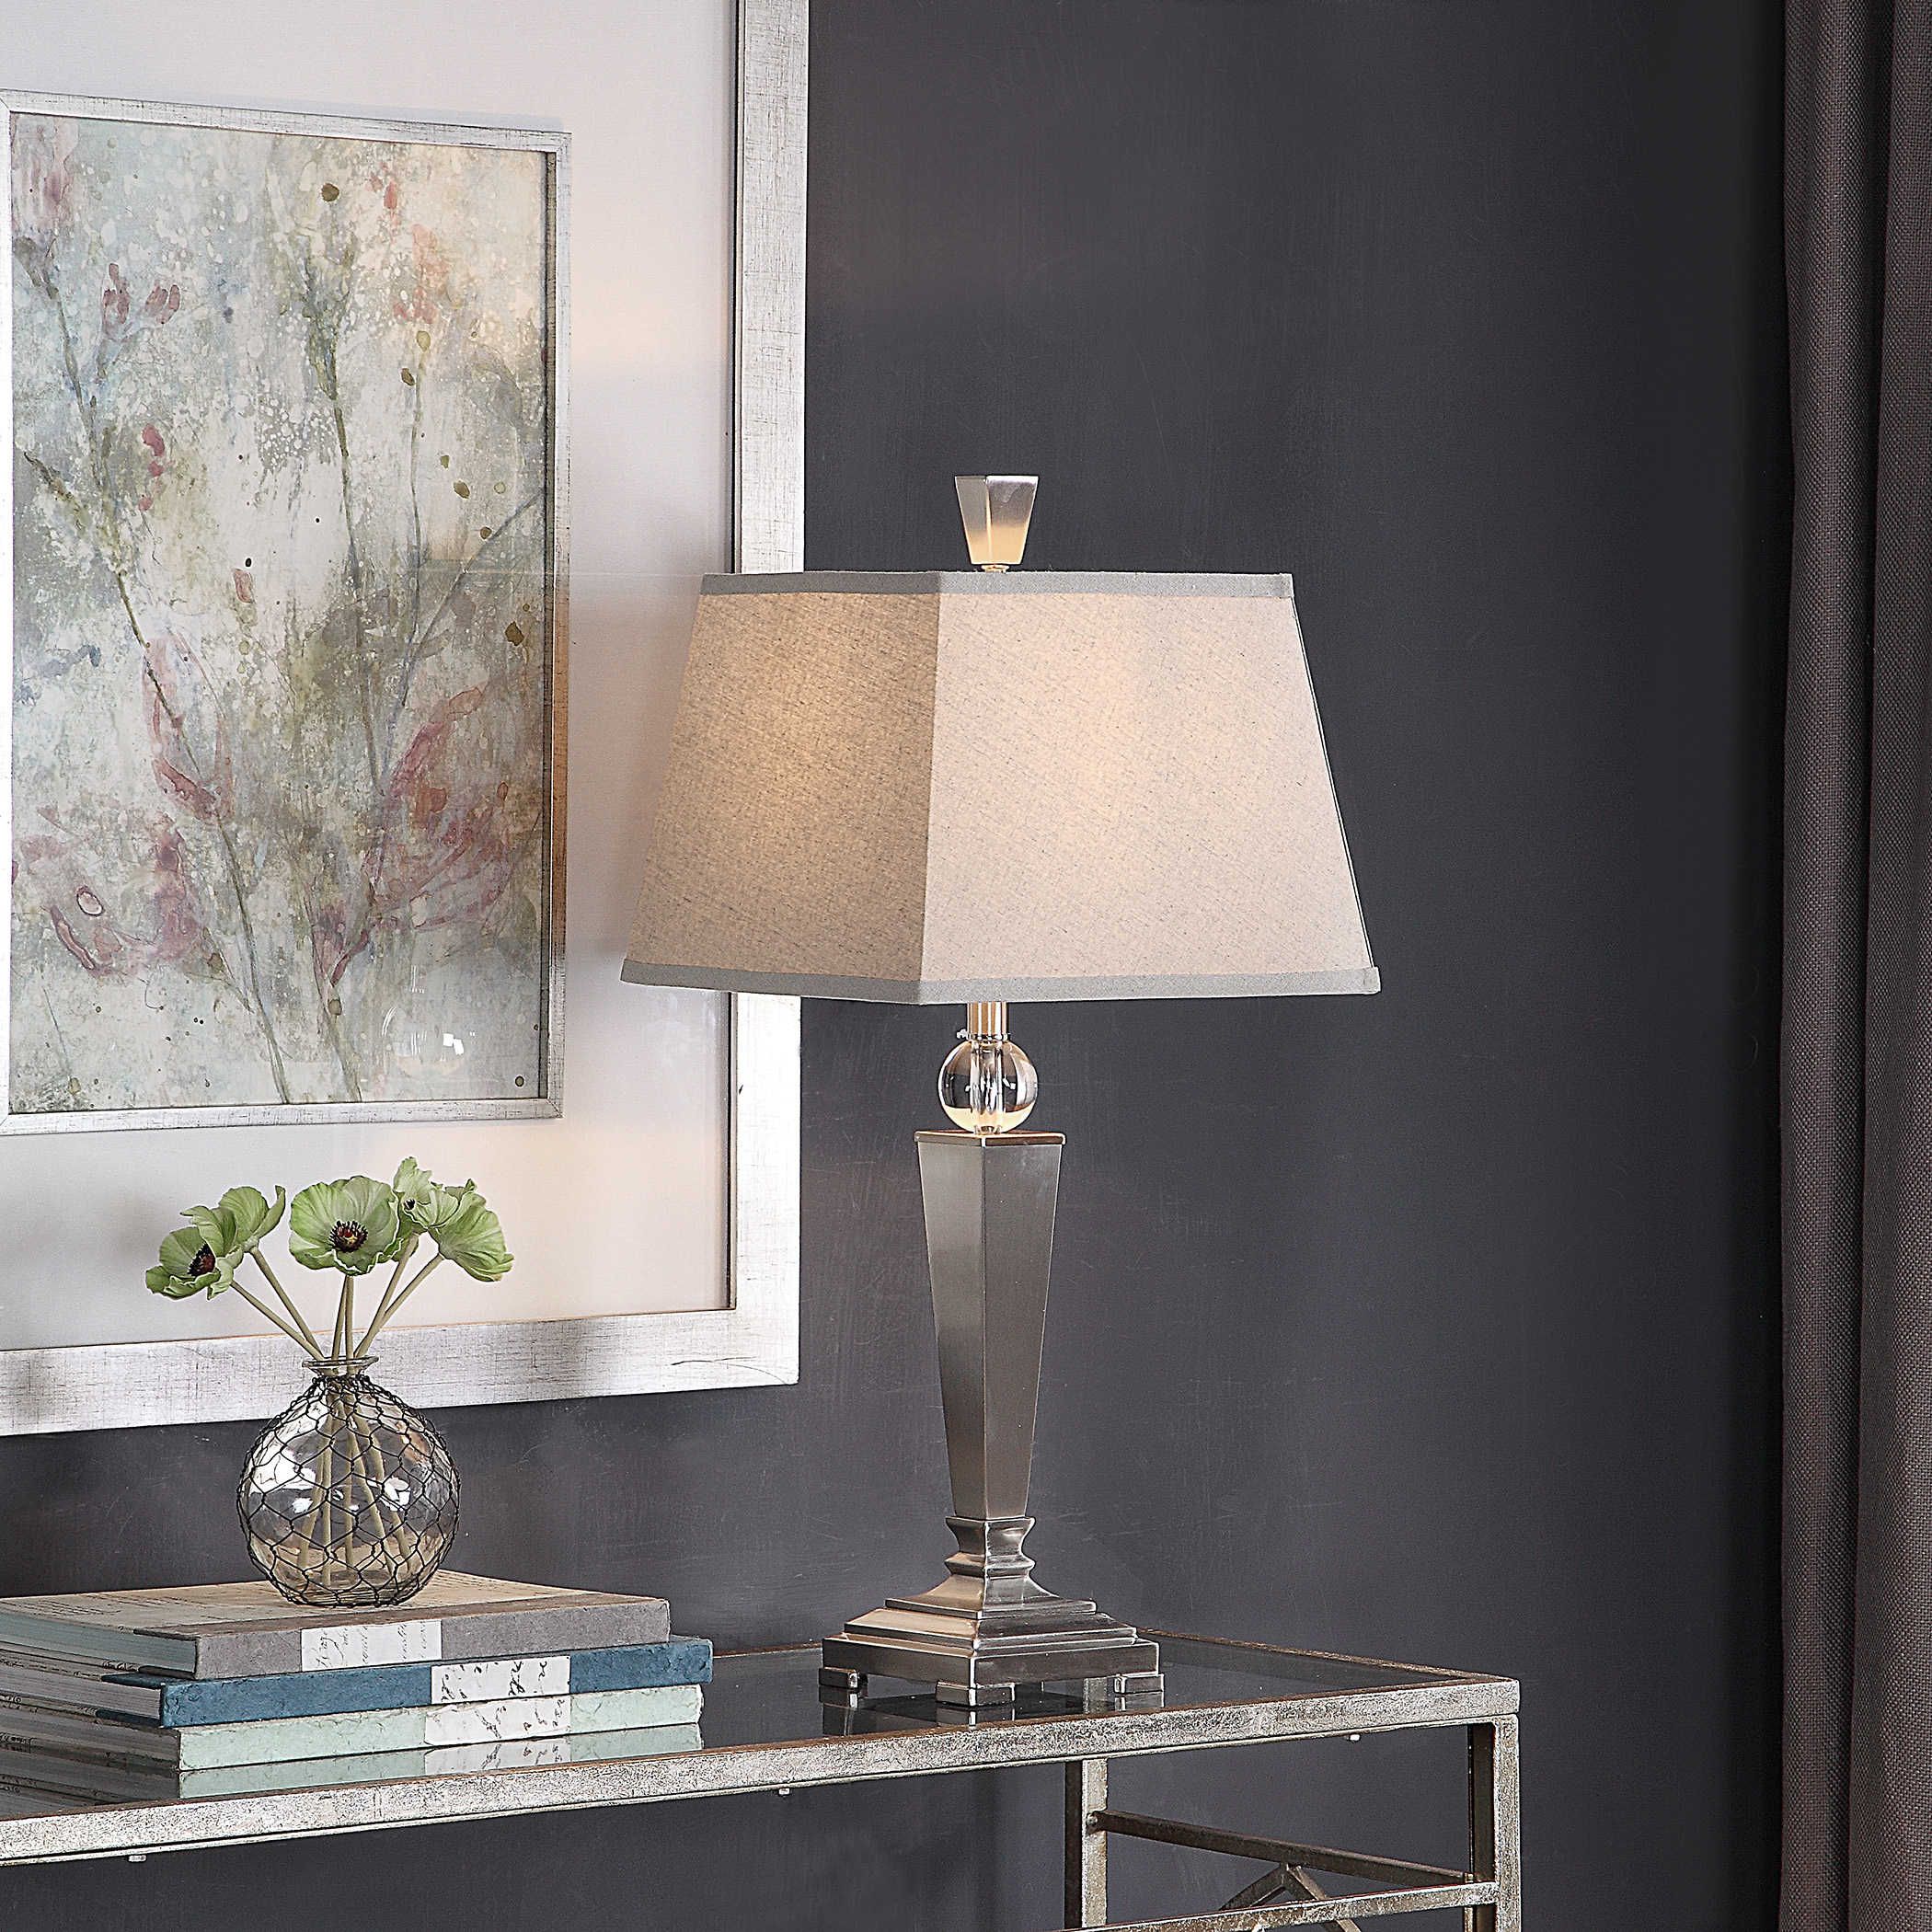 Zinc Decor Kinley Brushed Nickel Table Lamp | Ebay With Regard To Kinley Accent Mirrors (View 3 of 15)